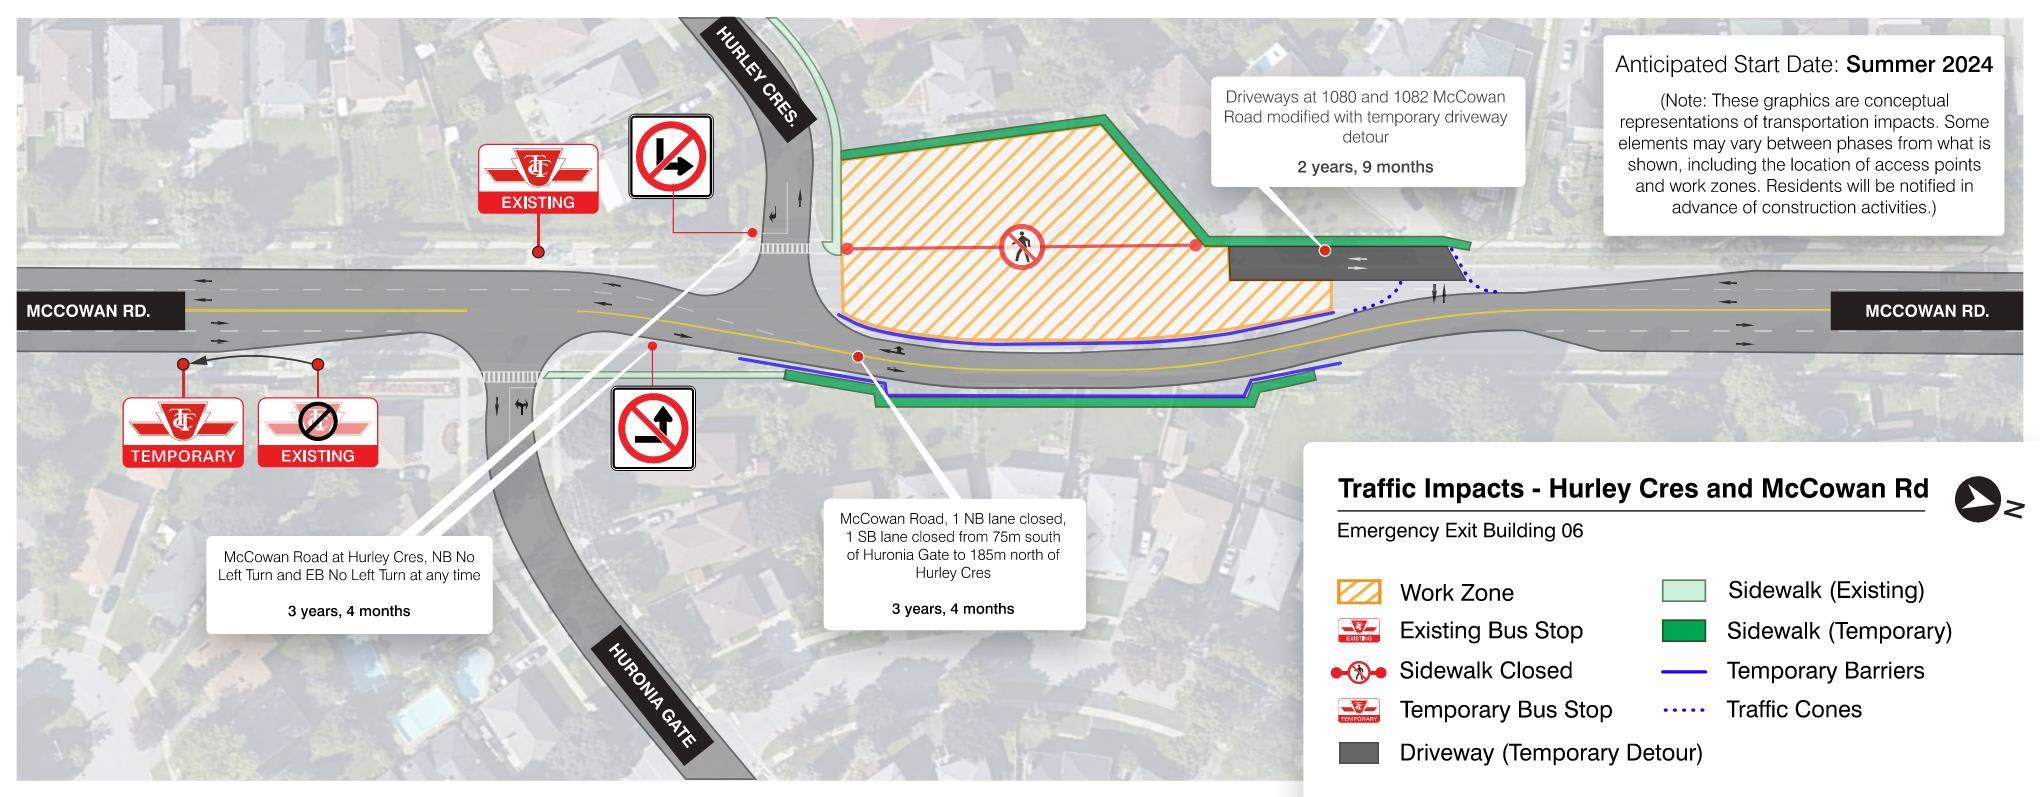 Hurley Cres – traffic management plan showing lane closures and driveway detours near Hurley Cr...